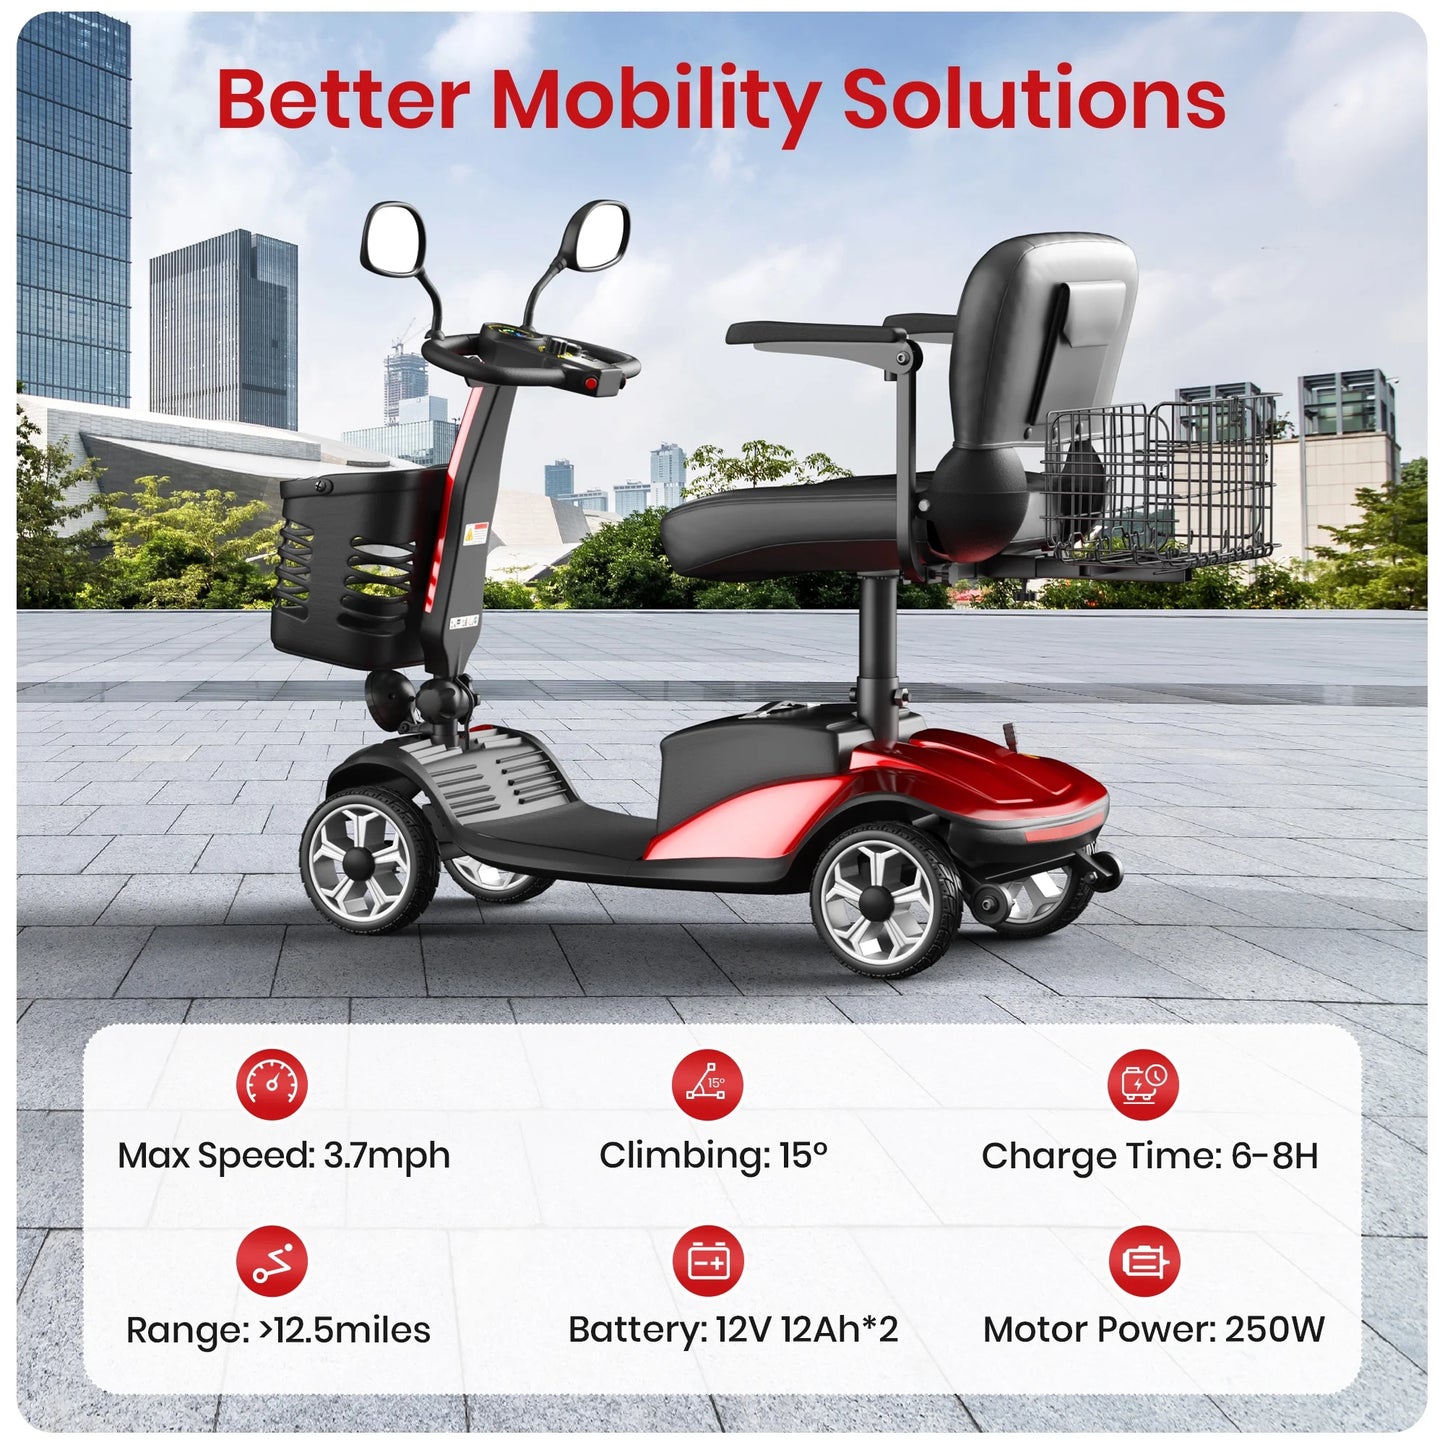 Upgrade 4 Wheel Mobility Scooter for Seniors, Foldable Powered Mobile Wheelchair for Adult 330Lbs, Red